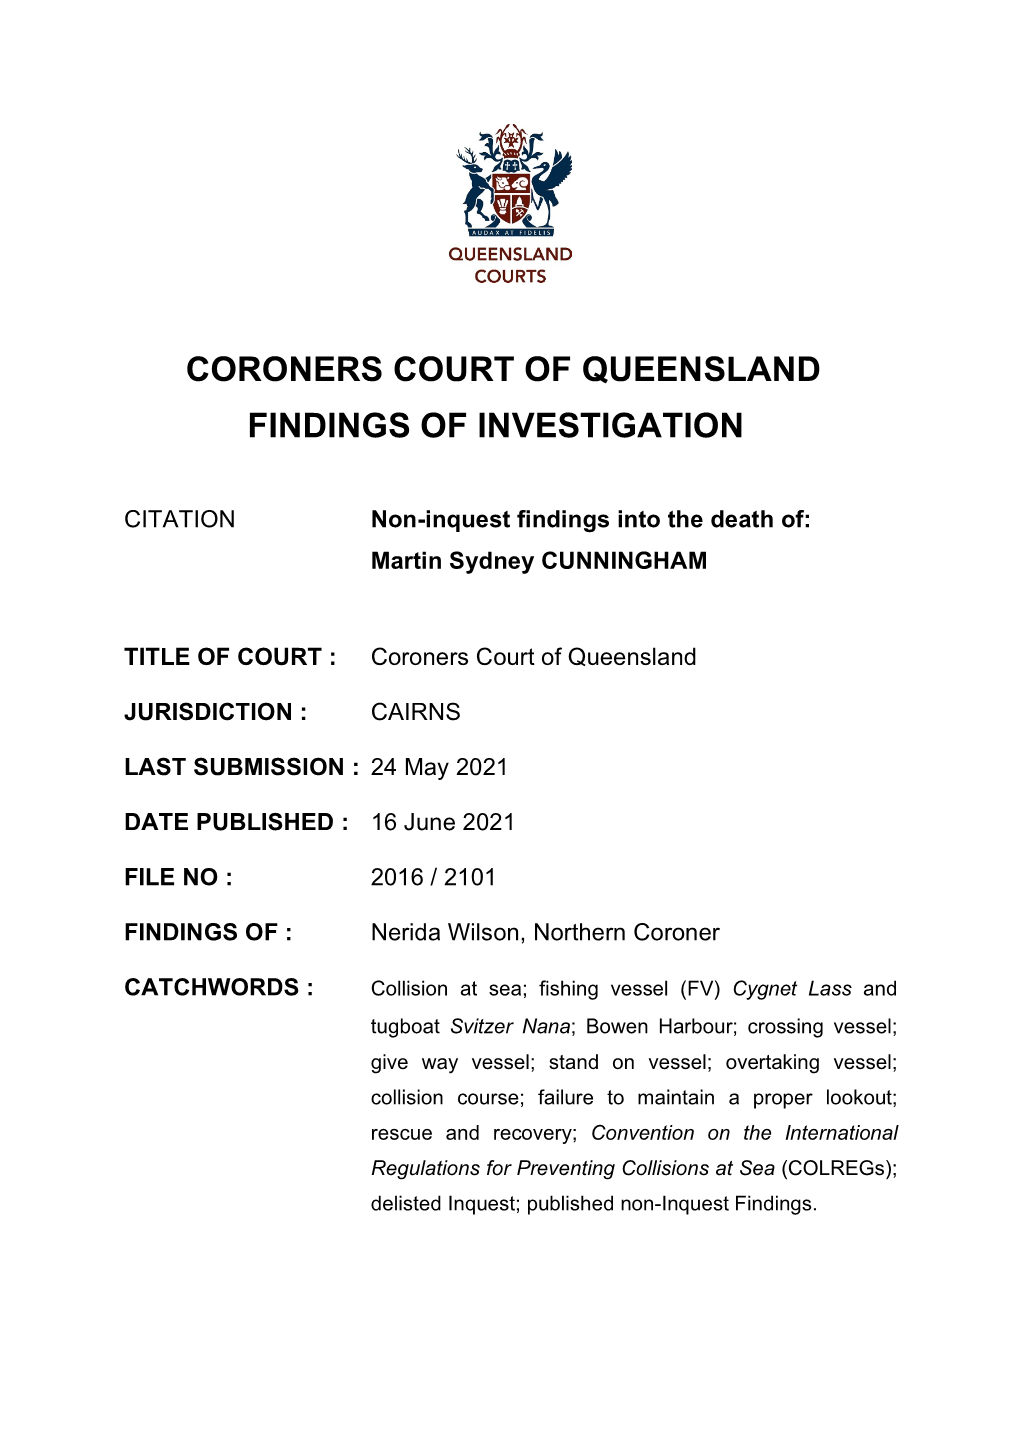 Non Inquest Findings Into the Death of Martin Sydney Cunningham